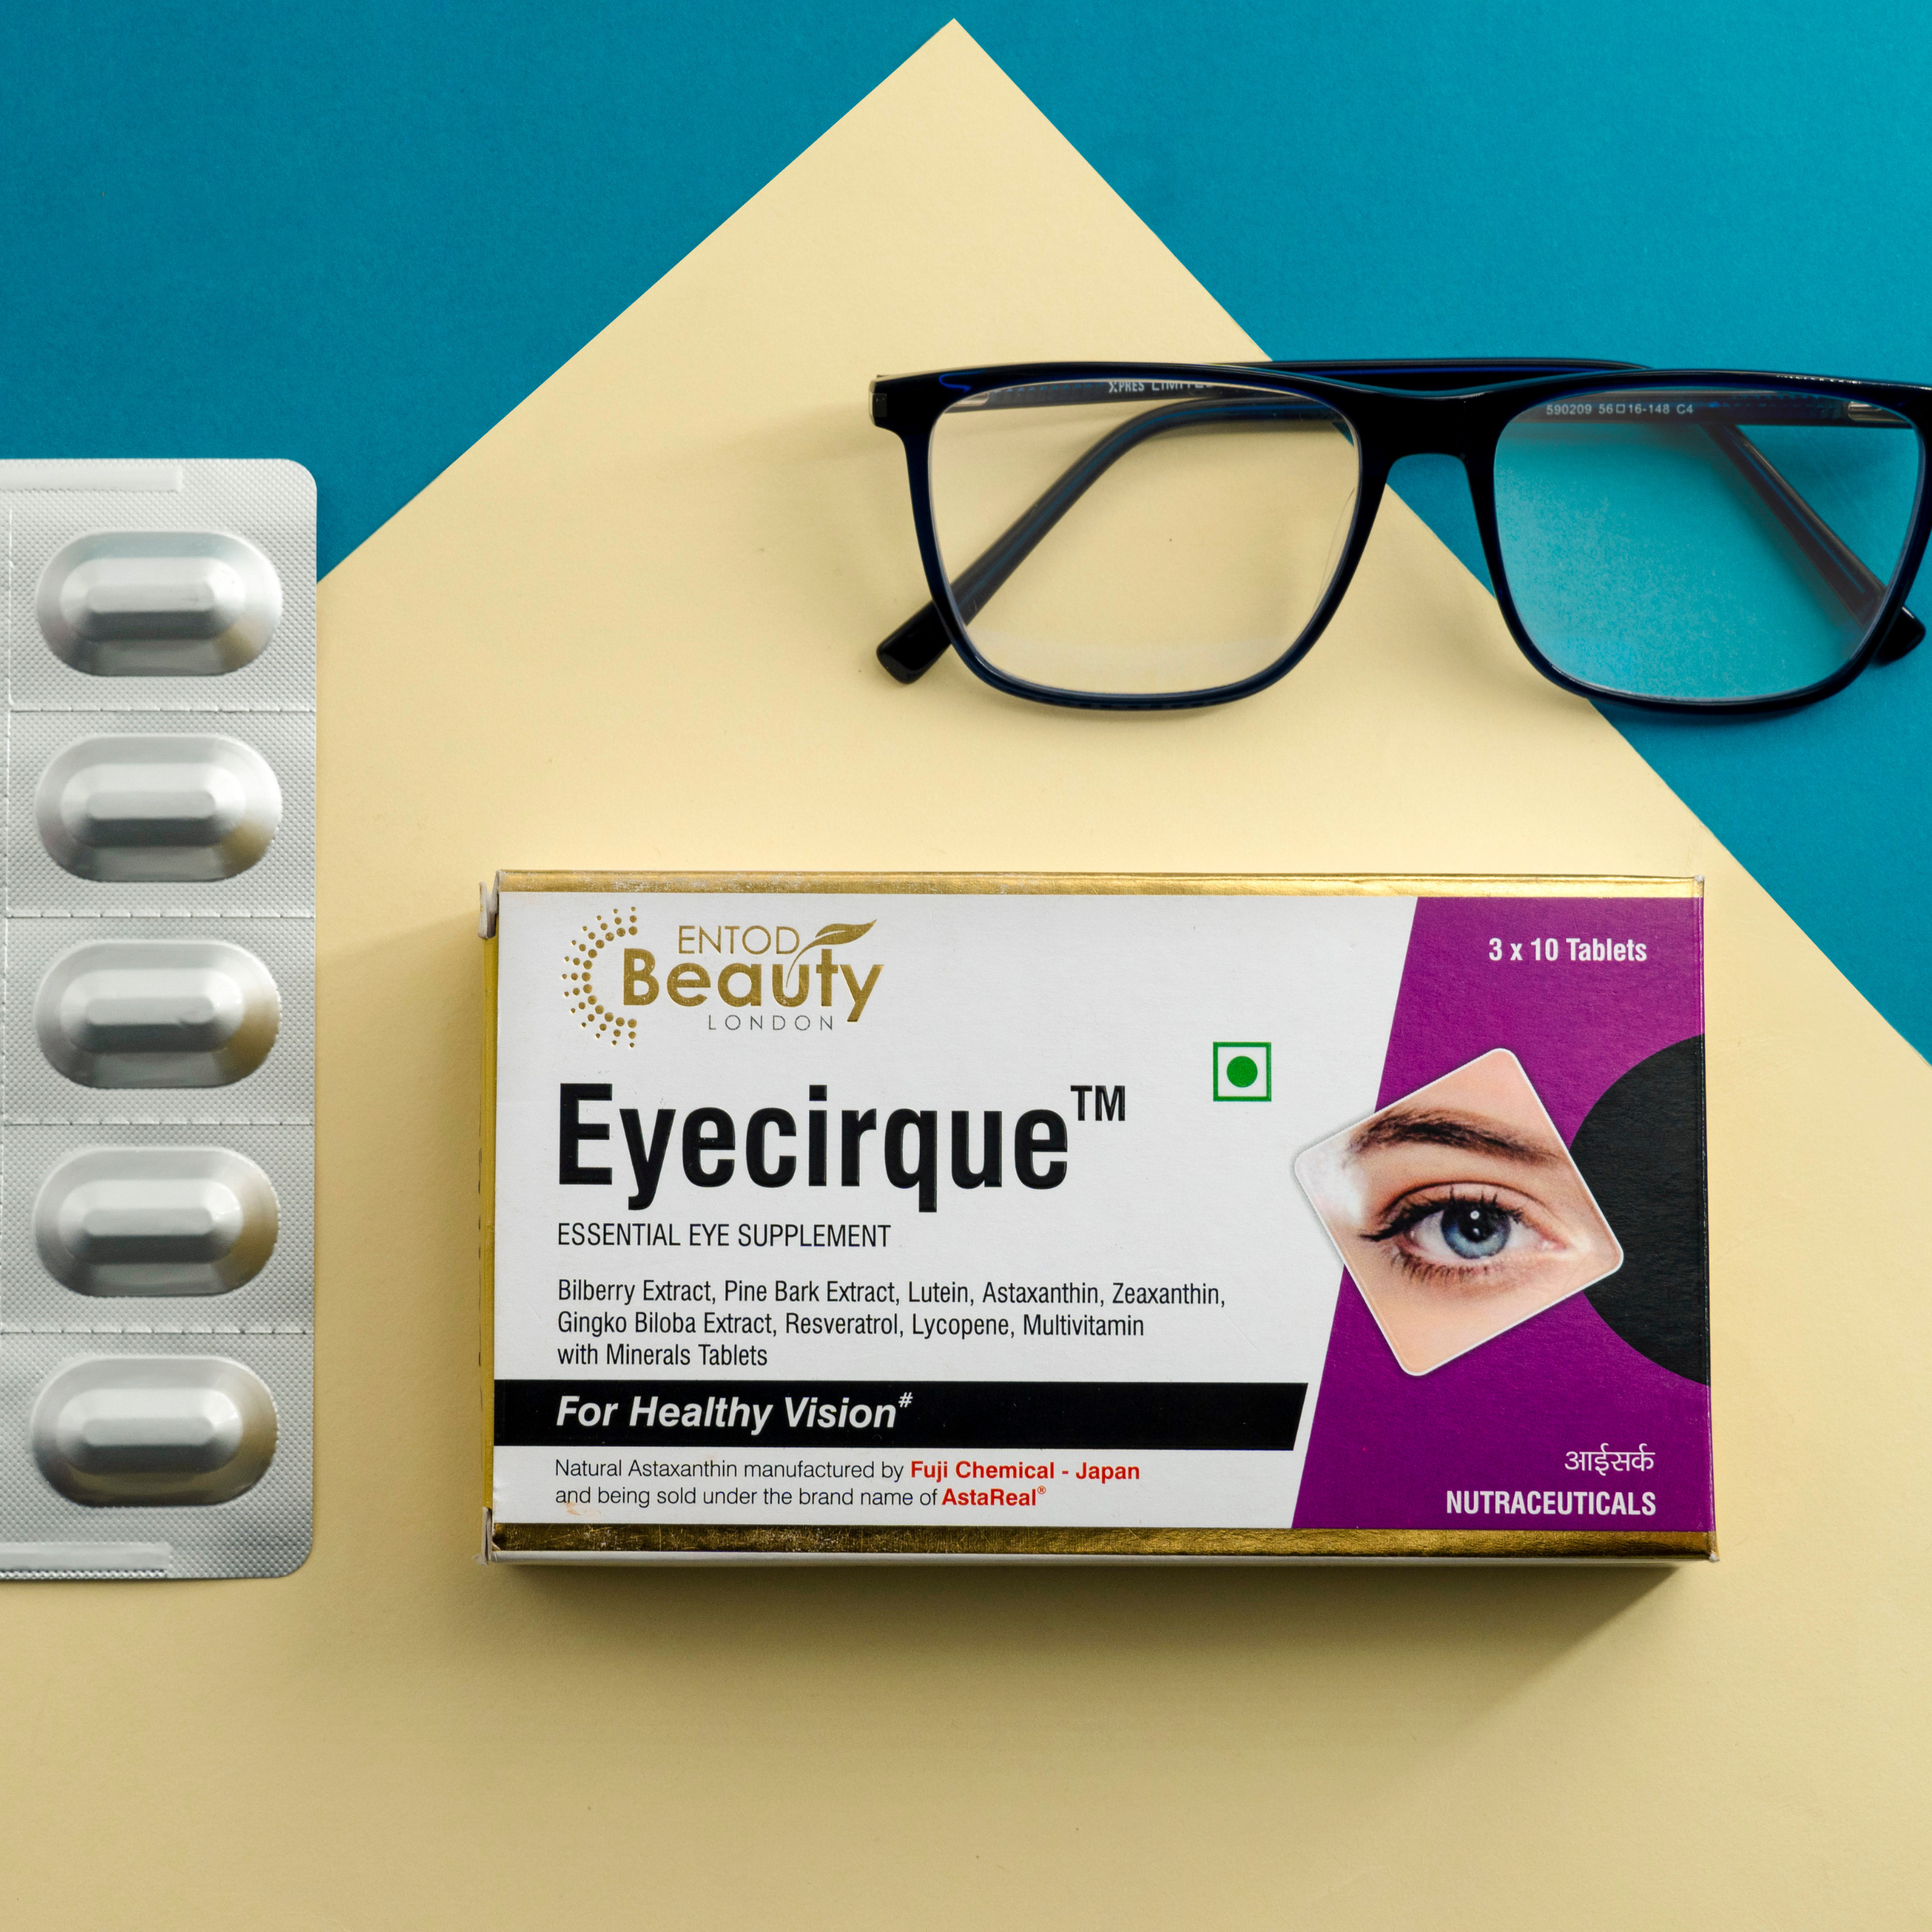 Essential Eye Care Supplement for Healthy Vision and Eye Care TWIN PACK